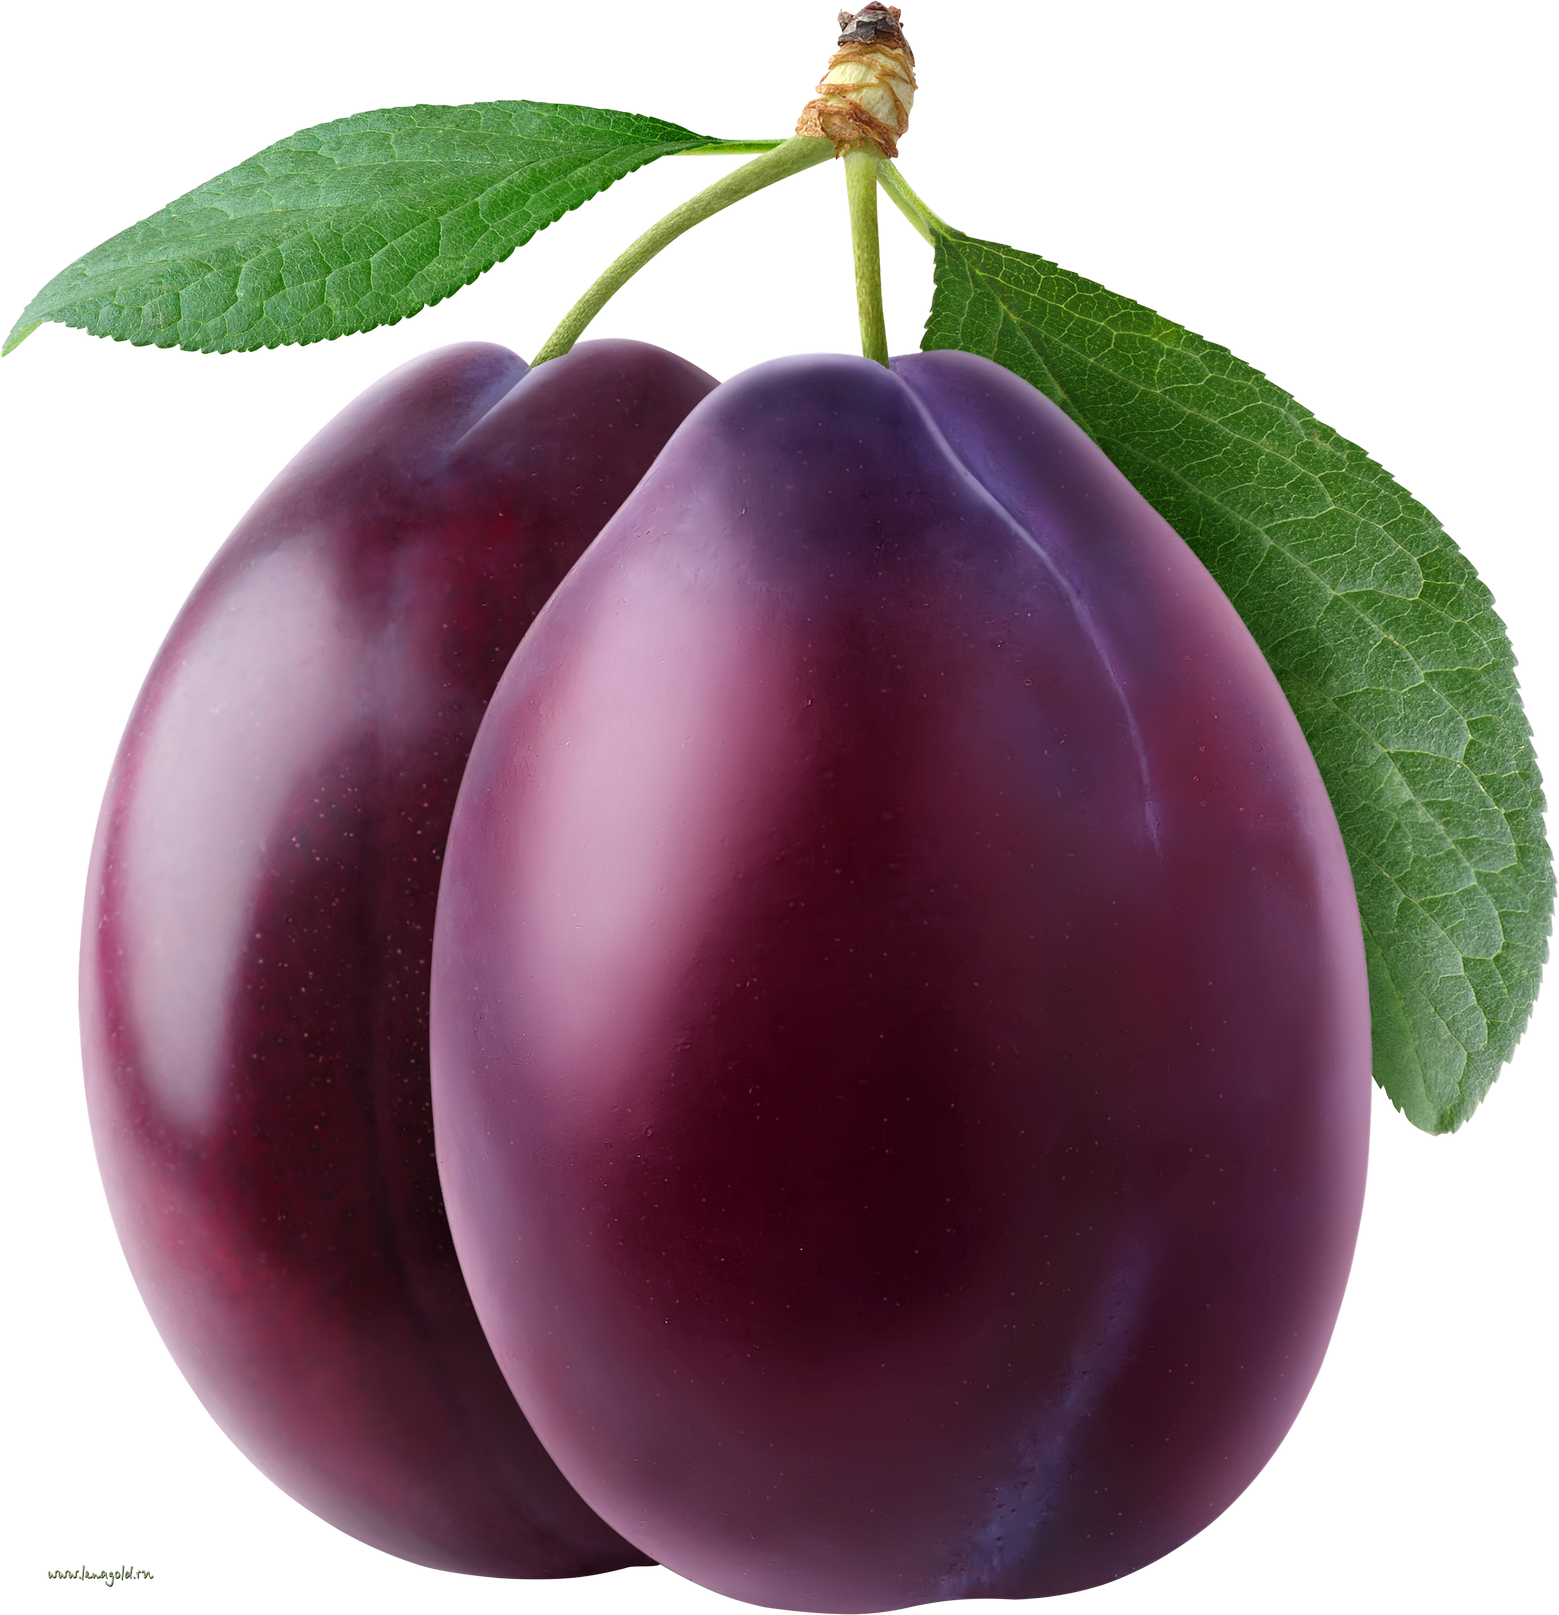 Plum clipart real. Png image purepng free